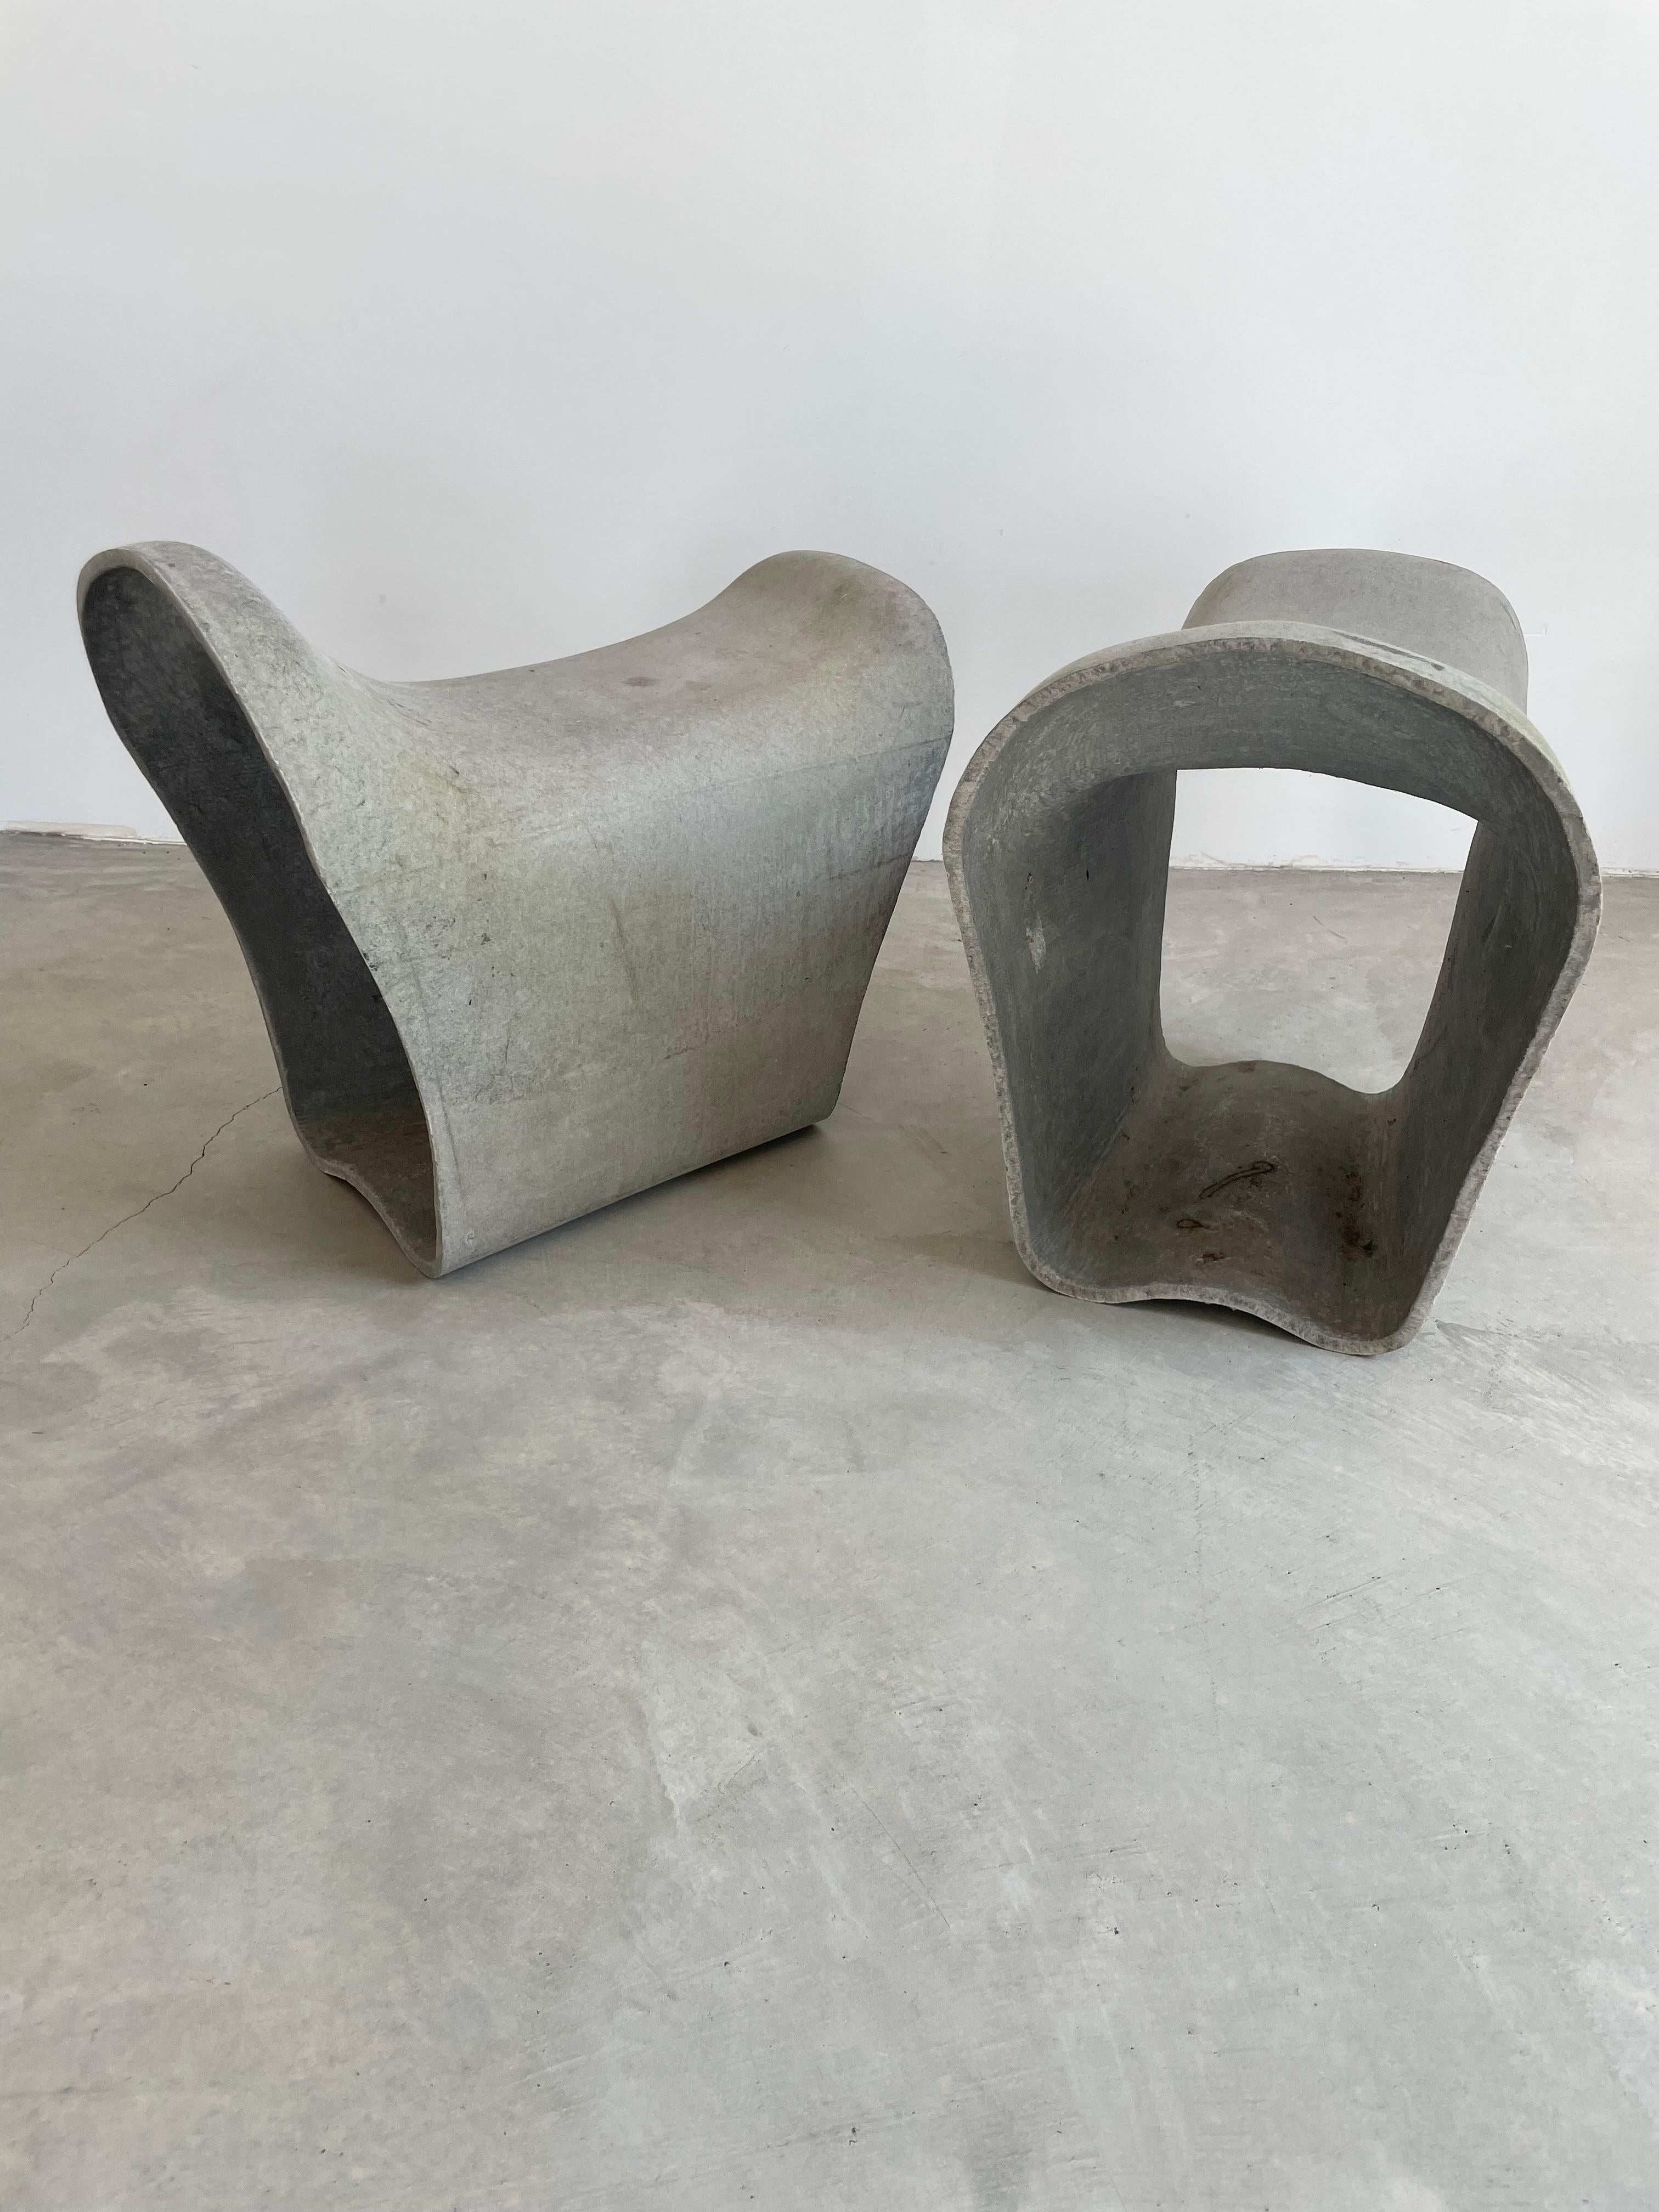 Rare concrete stool by Willy Guhl in the shape of a saddle. Hand-made in Switzerland in the 1960s, Excellent condition and design. Great sculptural pieces with beautiful soft lines. Surprisingly comfortable. Perfect for indoors or outside. Only one